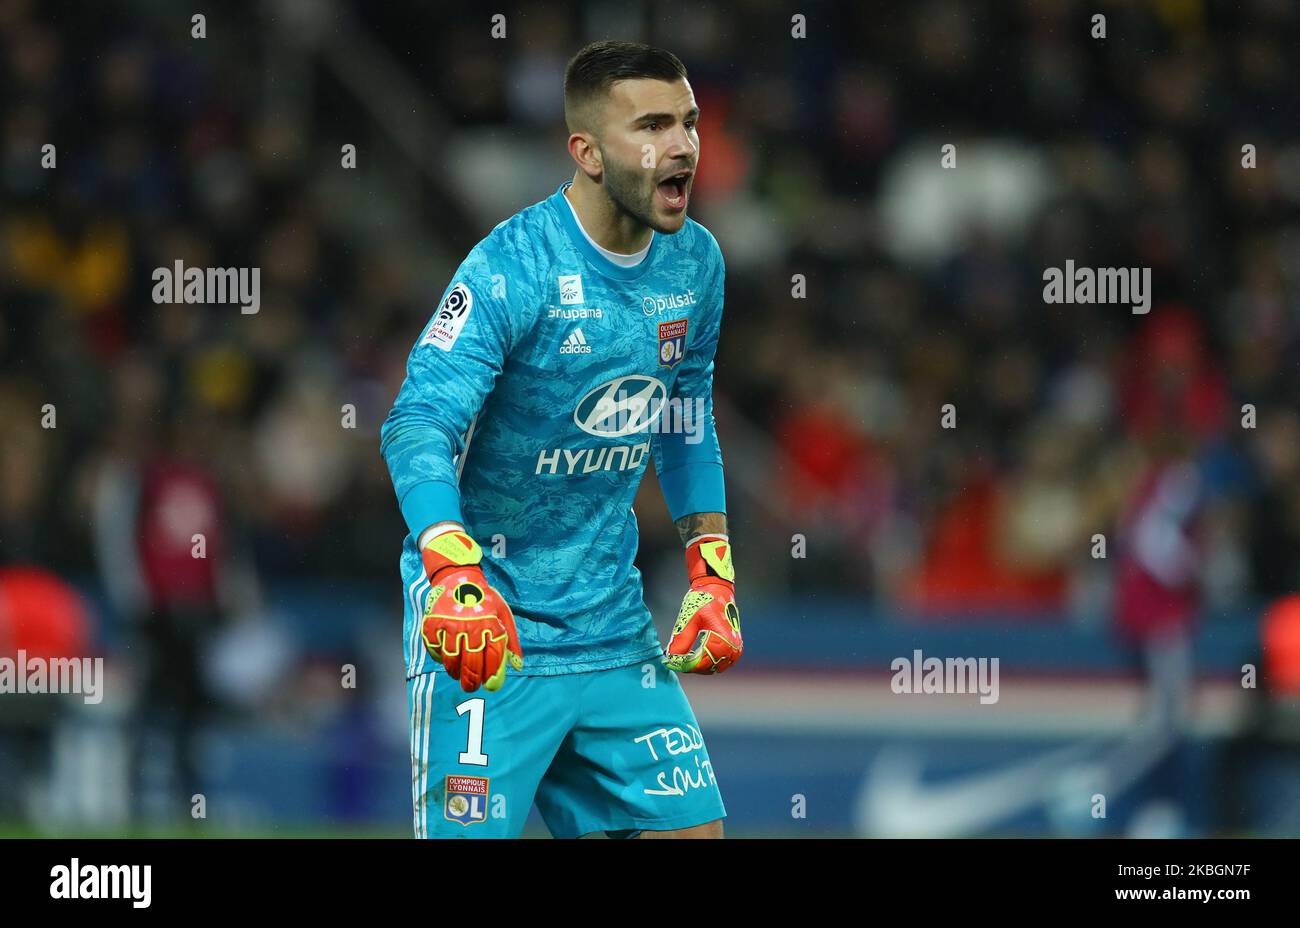 Anthony Lopes of OL during the football Ligue 1 Conforama match Paris Saint-Germain v Olympique Lyonnais at the Parc des Princes in Paris, France on February 9, 2020 (Photo by Matteo Ciambelli/NurPhoto) Stock Photo